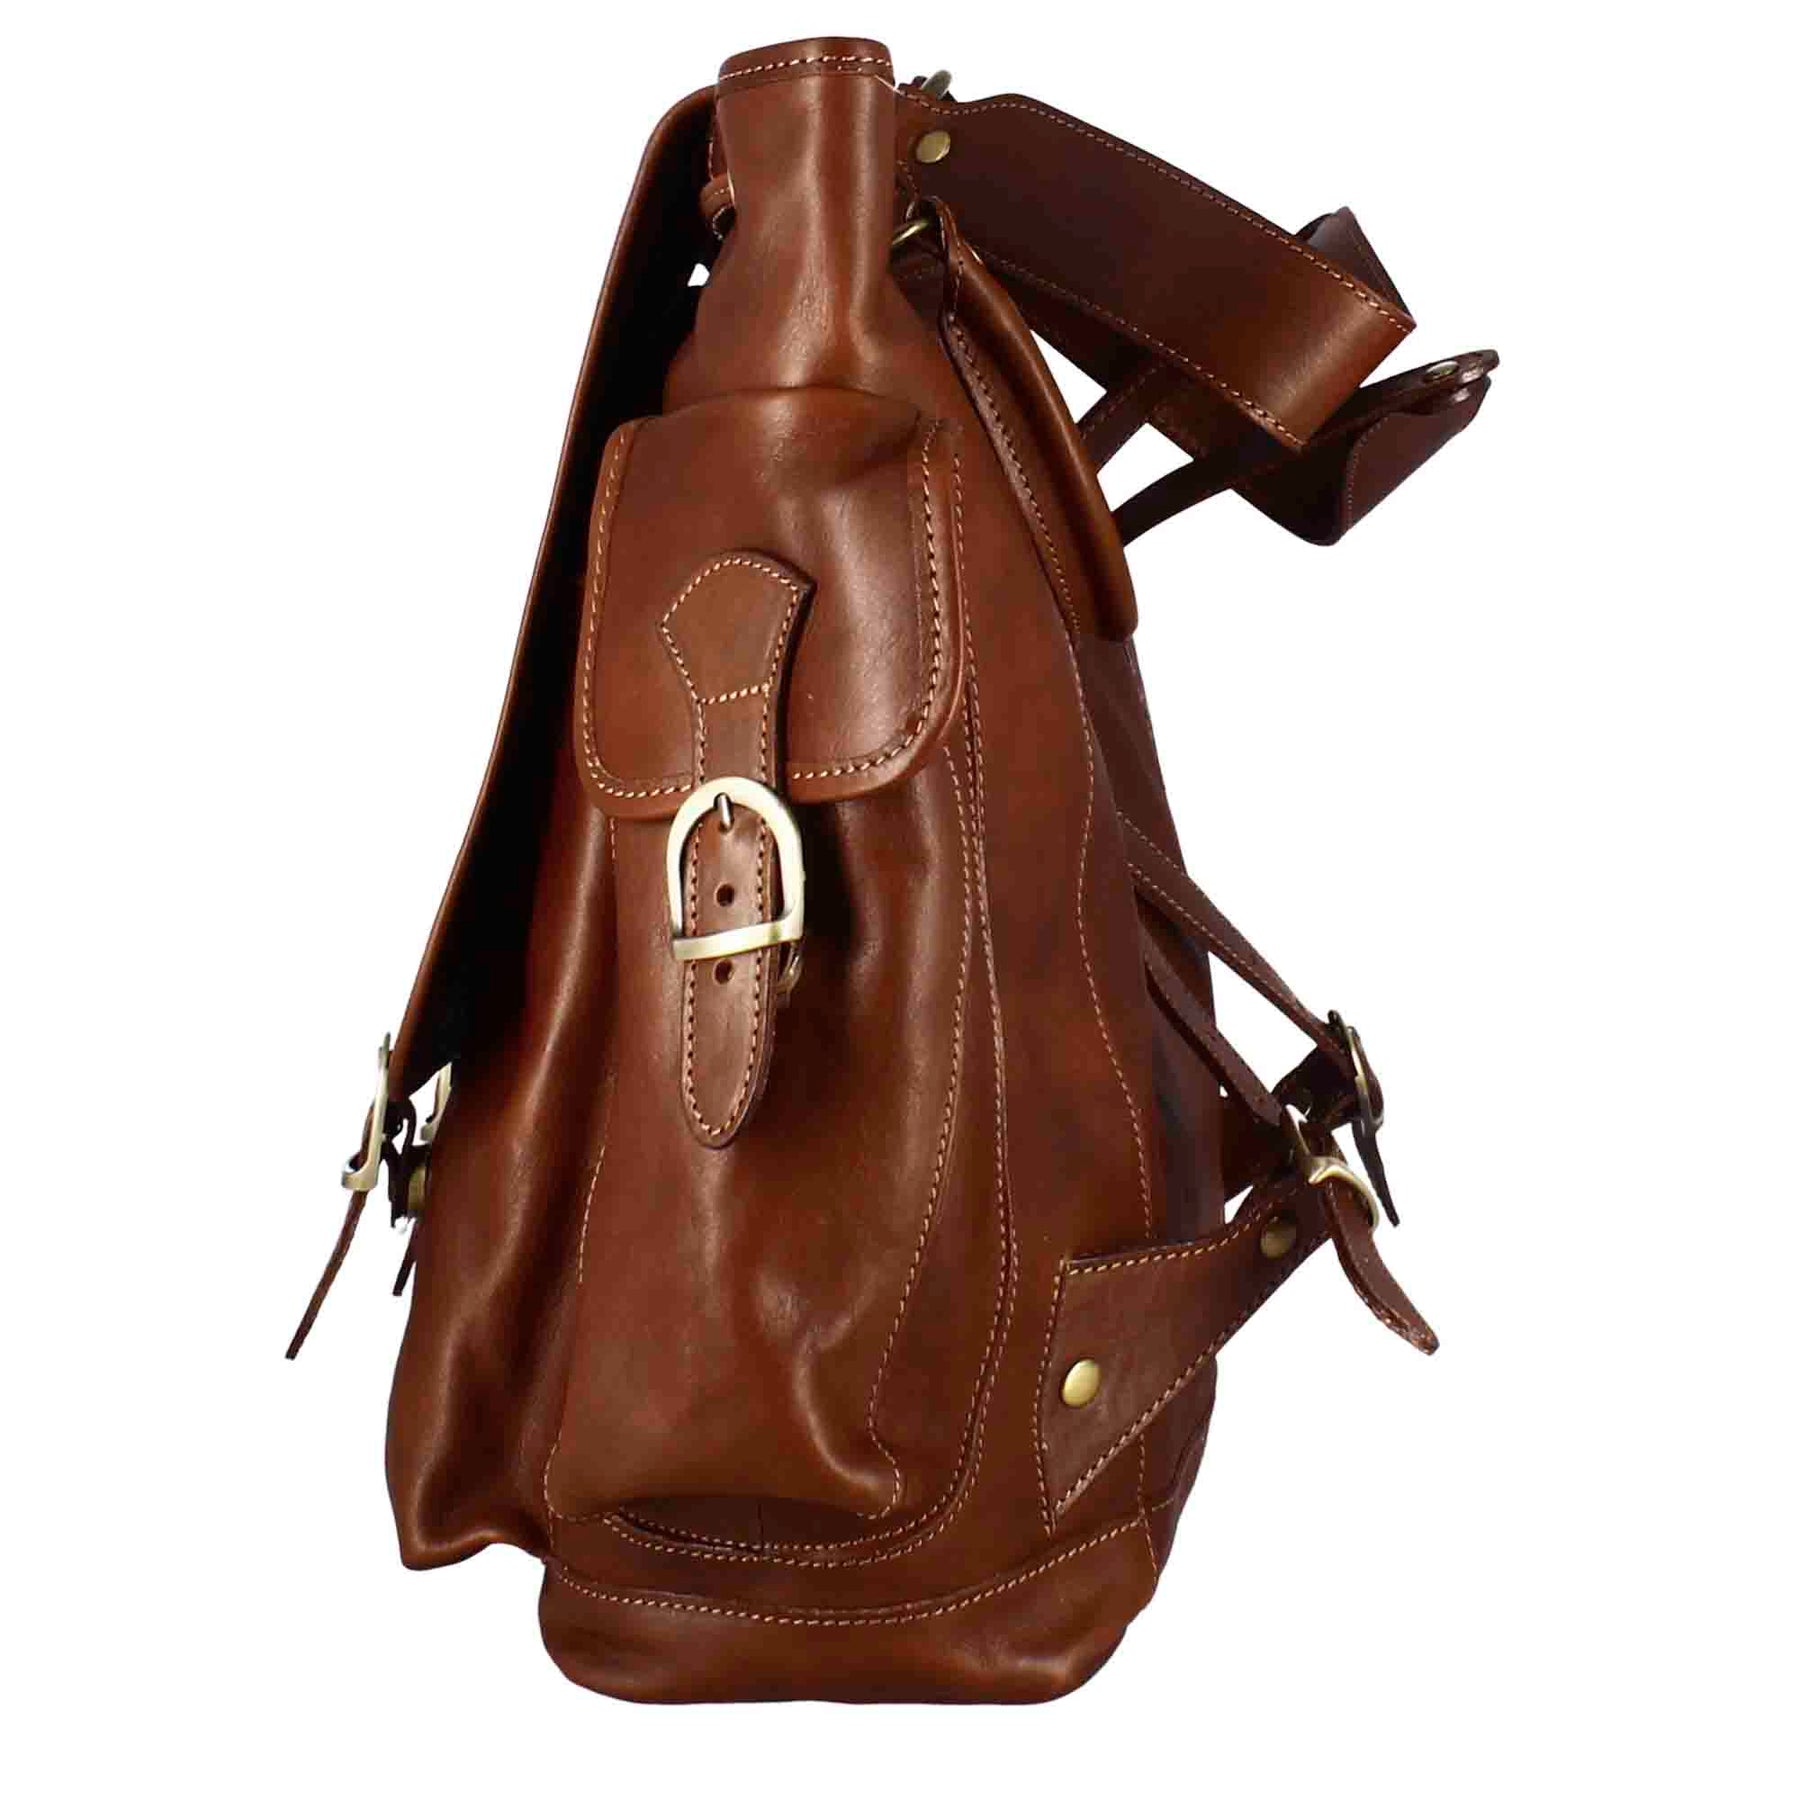 Men's full-grain leather multi-pocket backpack with buckle fastening brown colour